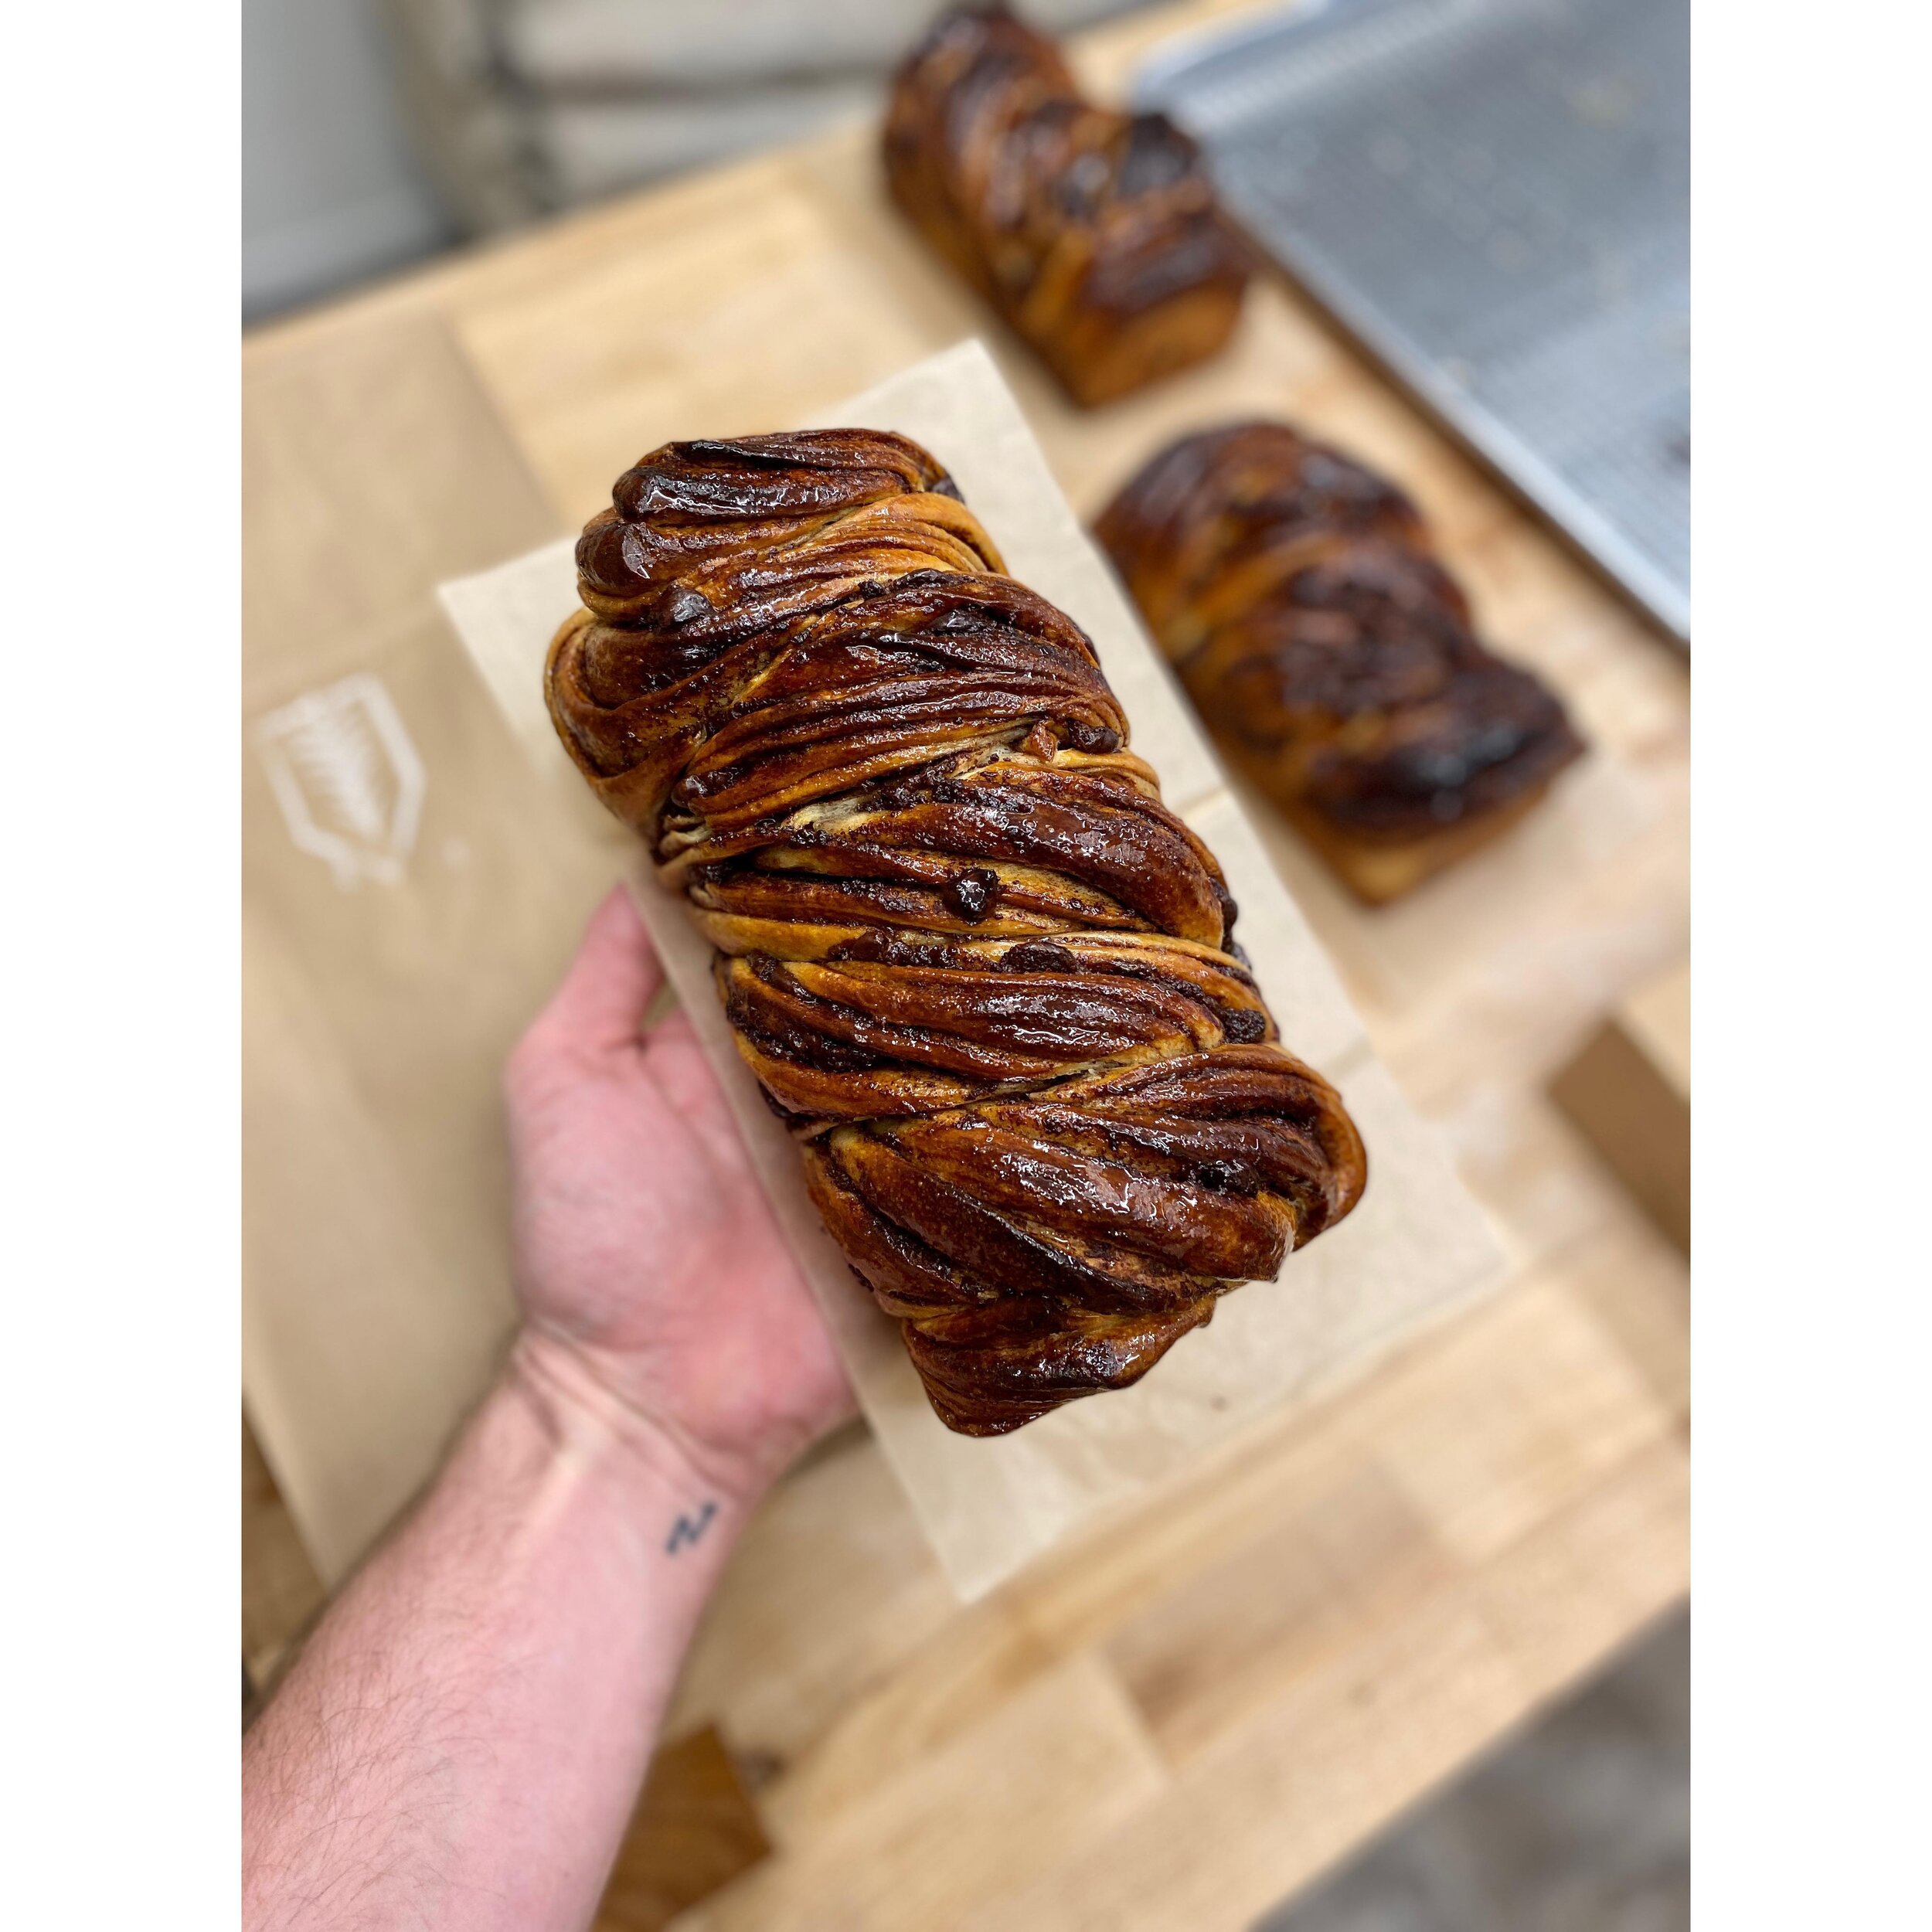 This weeks offerings include: Chocolate &amp; Nutella Babka, Rye Country, Lemon Mint White Chocolate, Rolled Oat &amp; Brown Sugar and Rouge de Bordeaux Baguettes. Snag yours at the link in our bio!